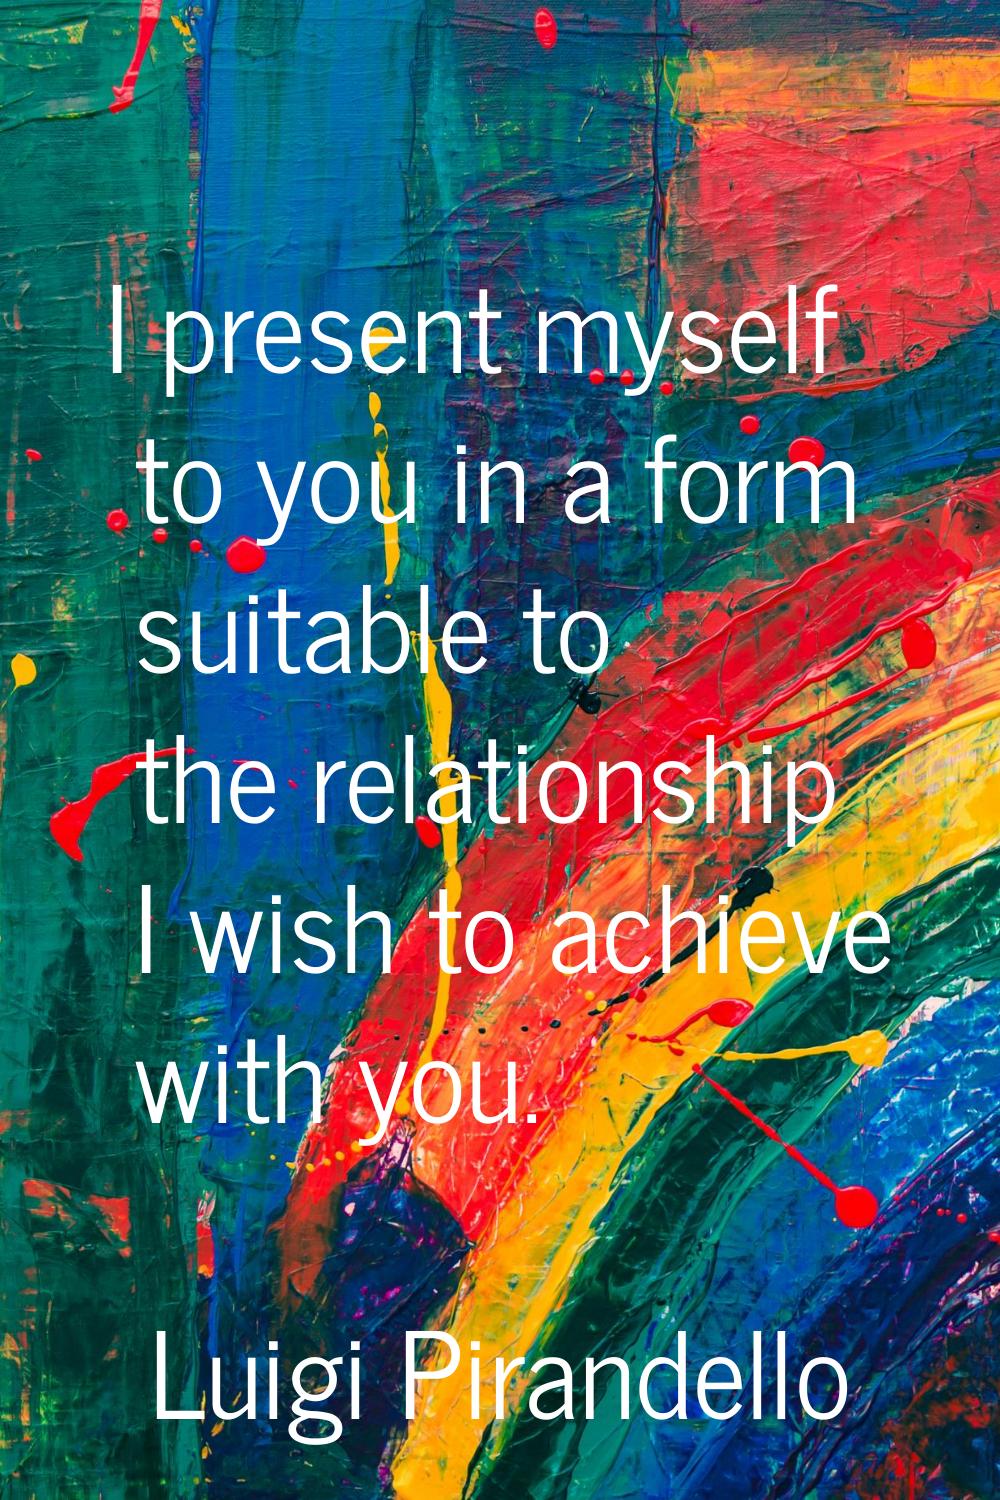 I present myself to you in a form suitable to the relationship I wish to achieve with you.